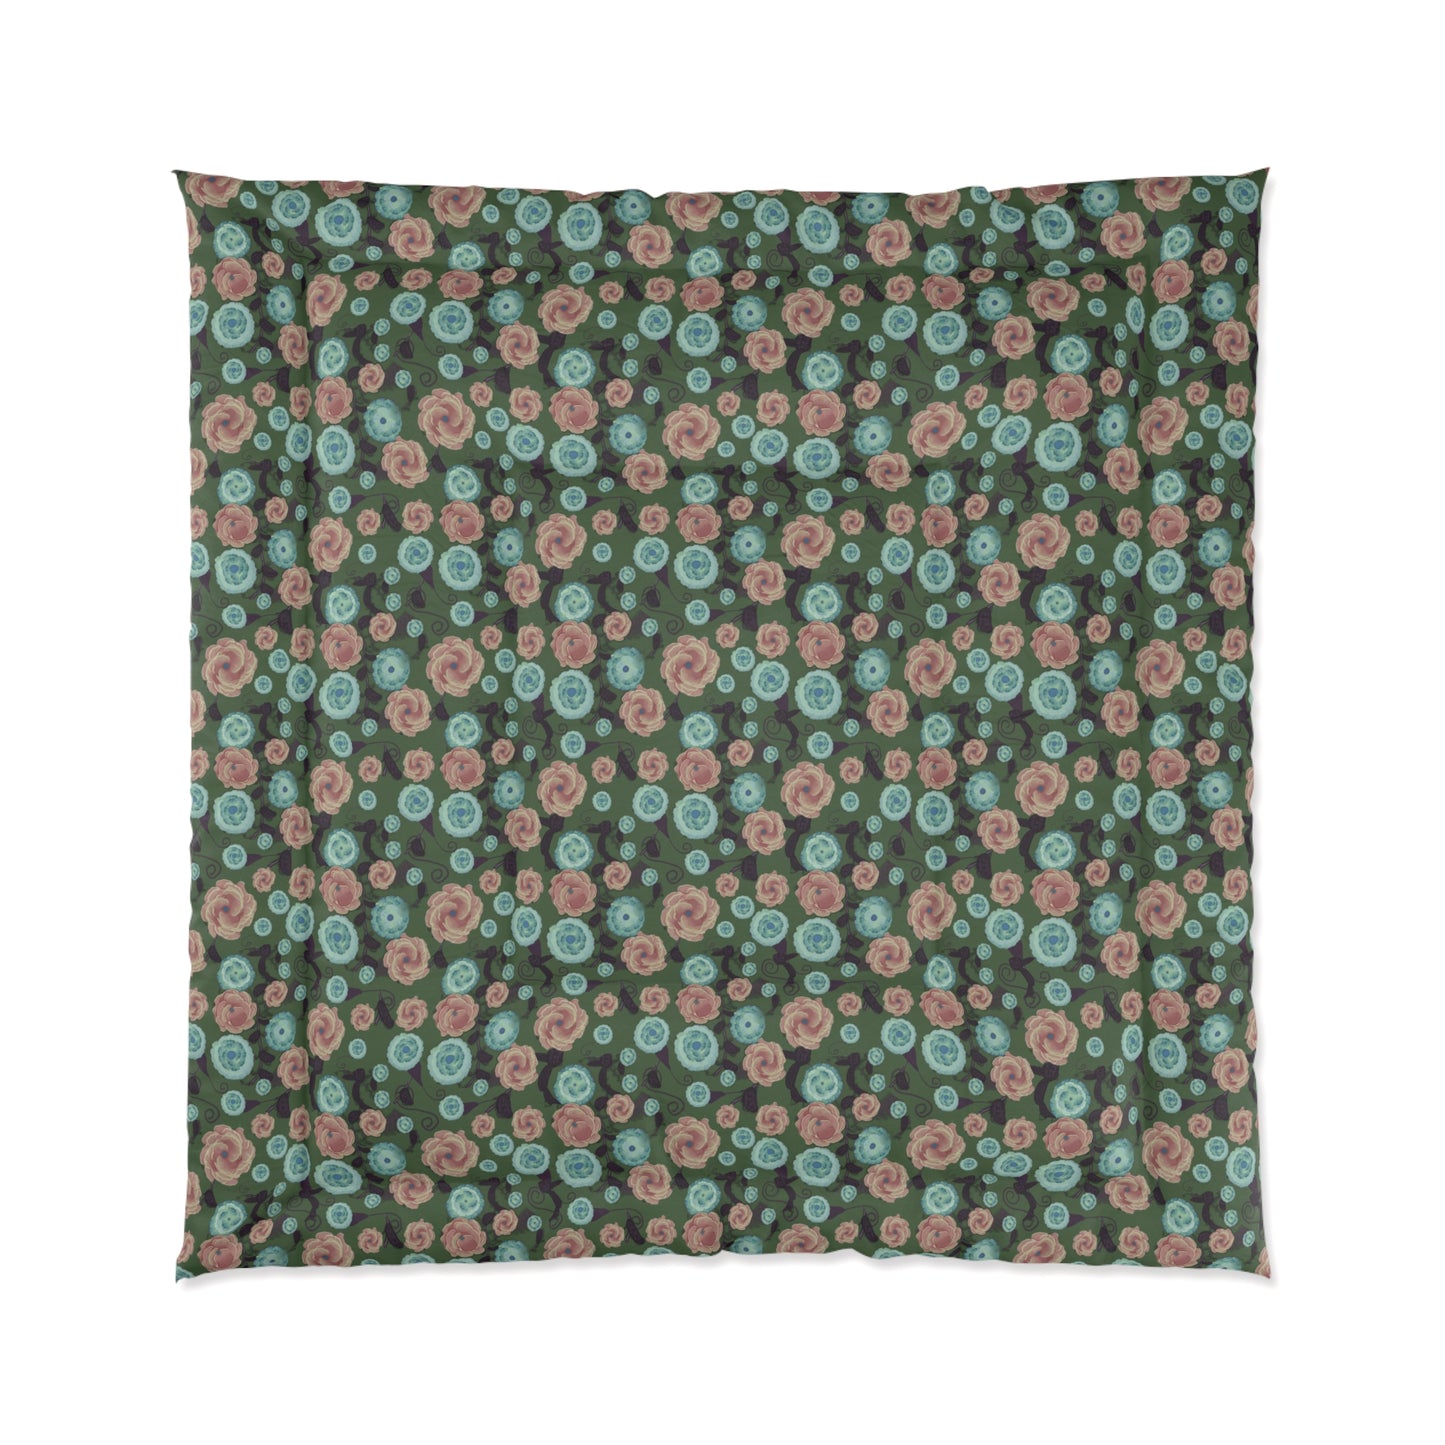 Earthy Peach and Turquoise Flower Pattern Comforter